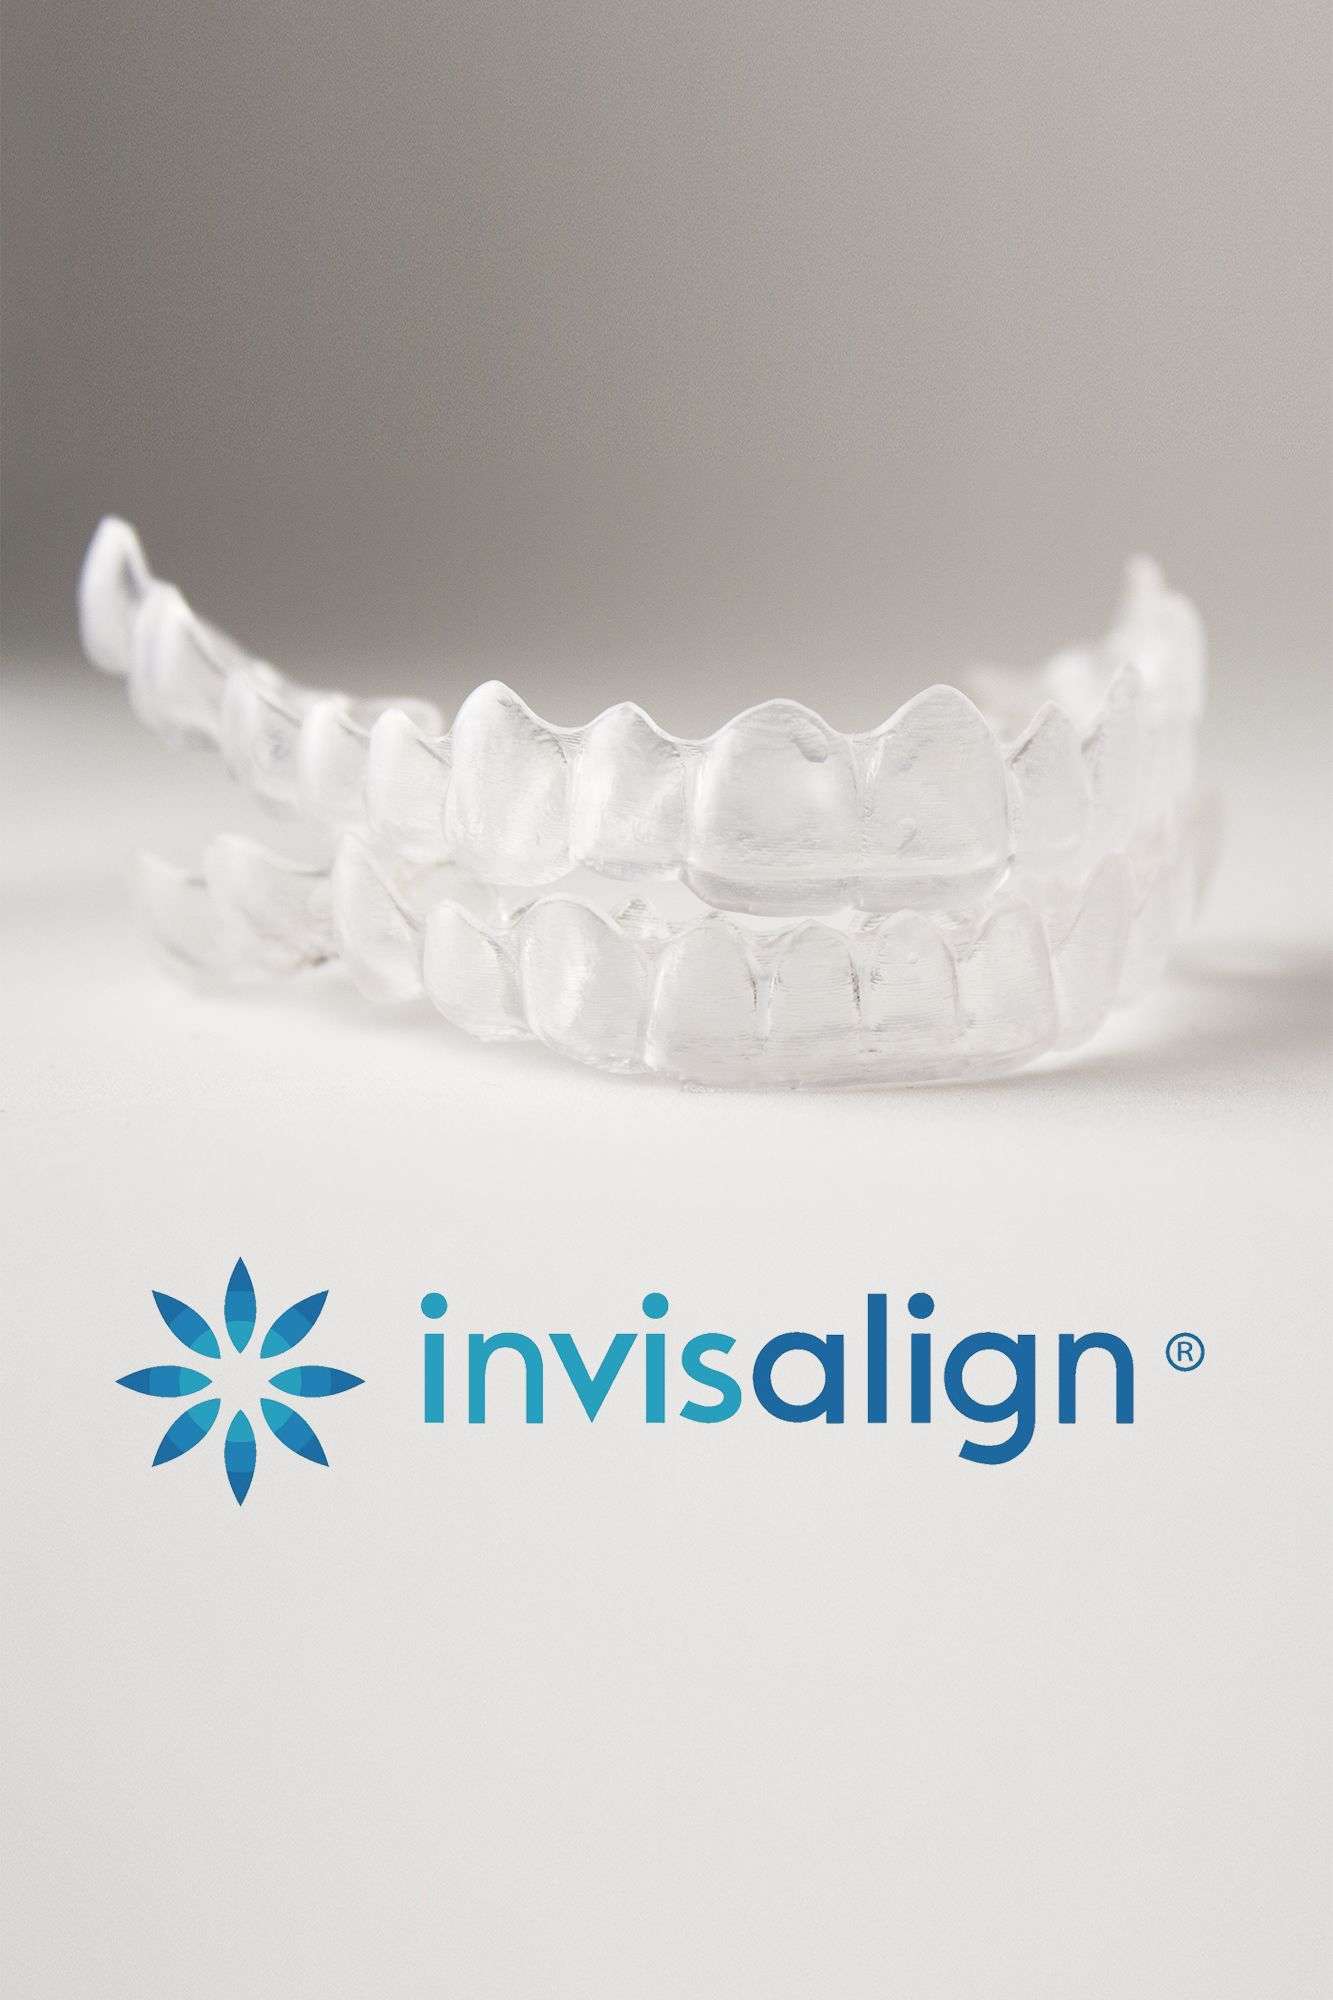 How To Deal With Invisalign Discomfort